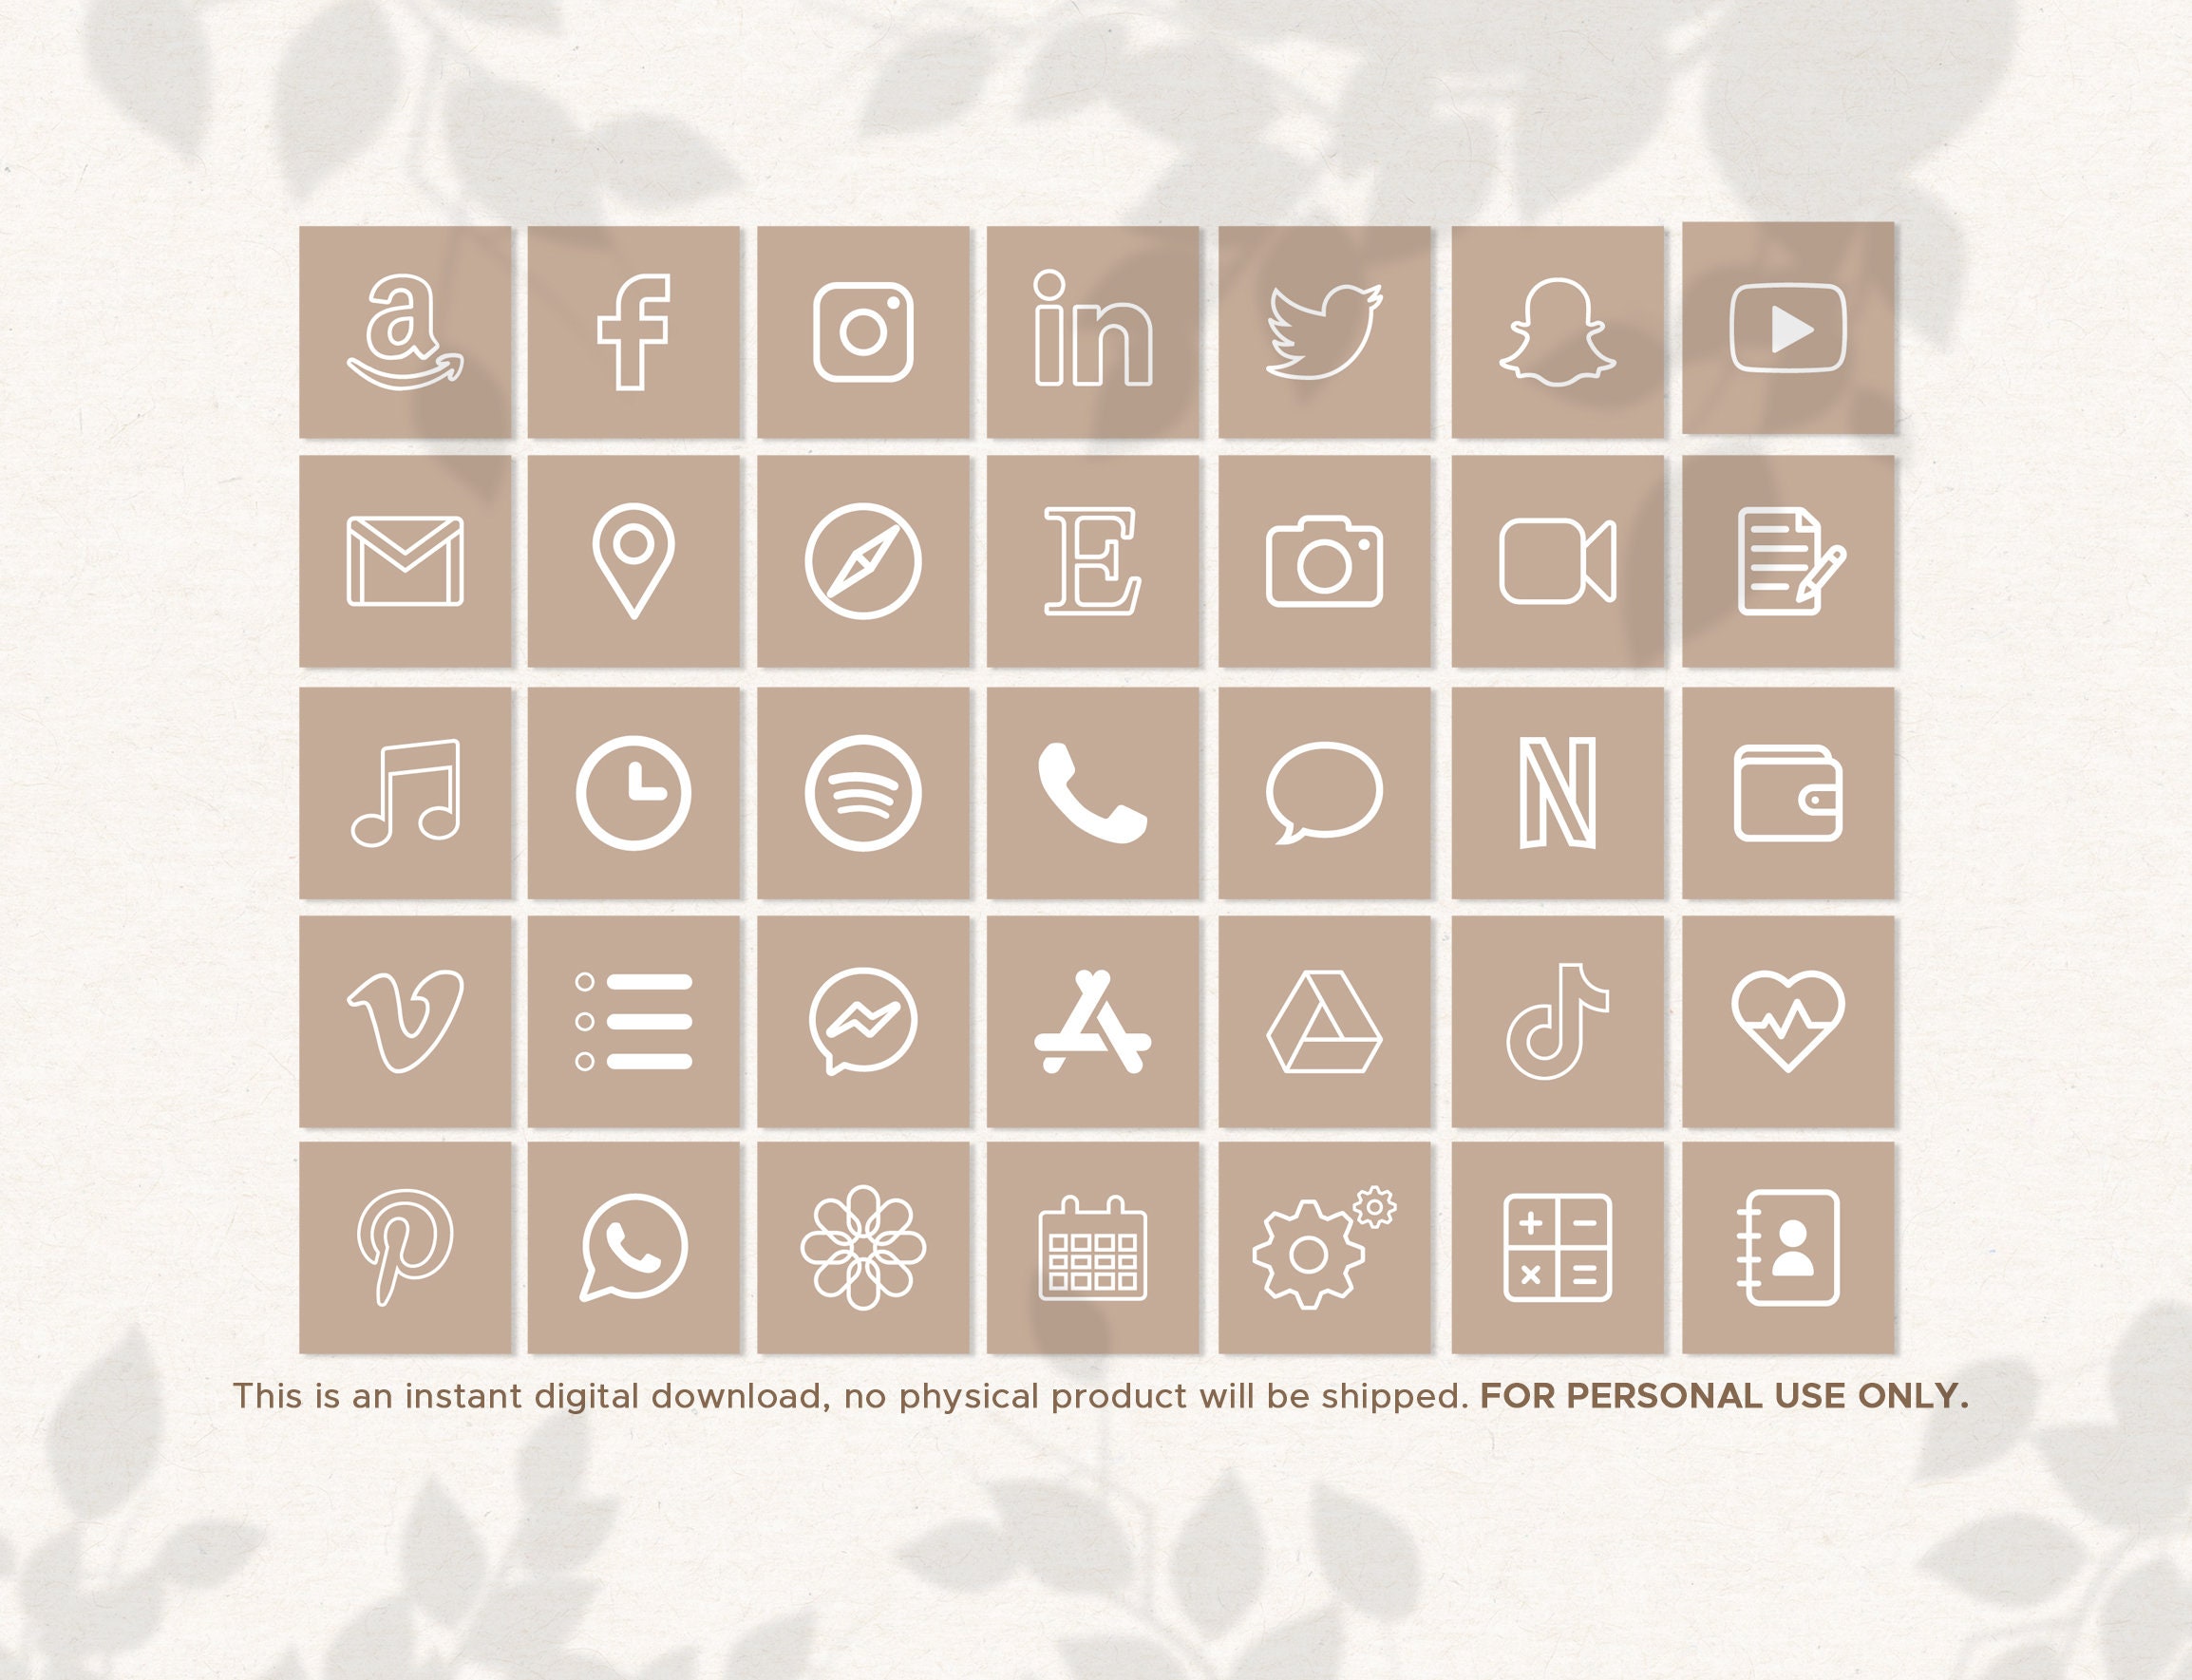 175 Neutral Nude iOS14 App Icons 35 Icons in 5 Colors | Etsy